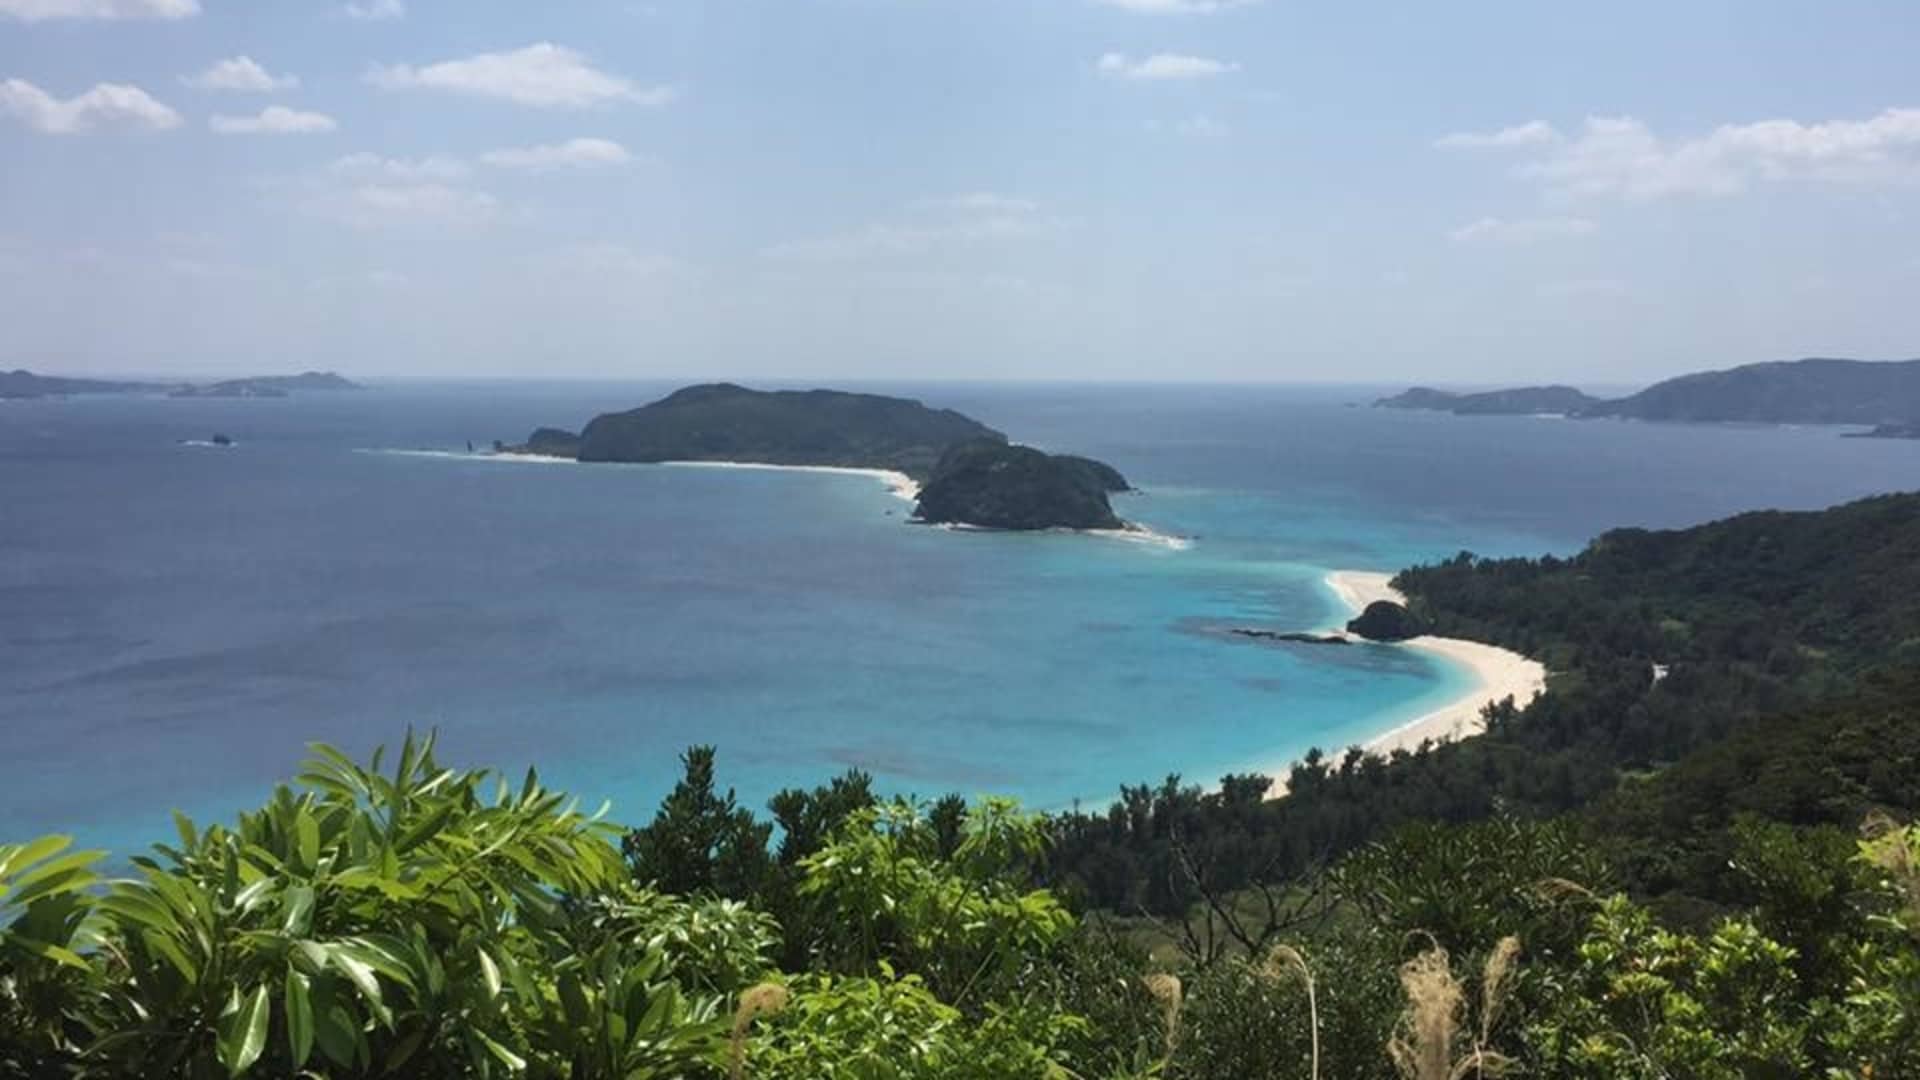 The island of Zamami is the second largest of Japan's Kerama Islands.